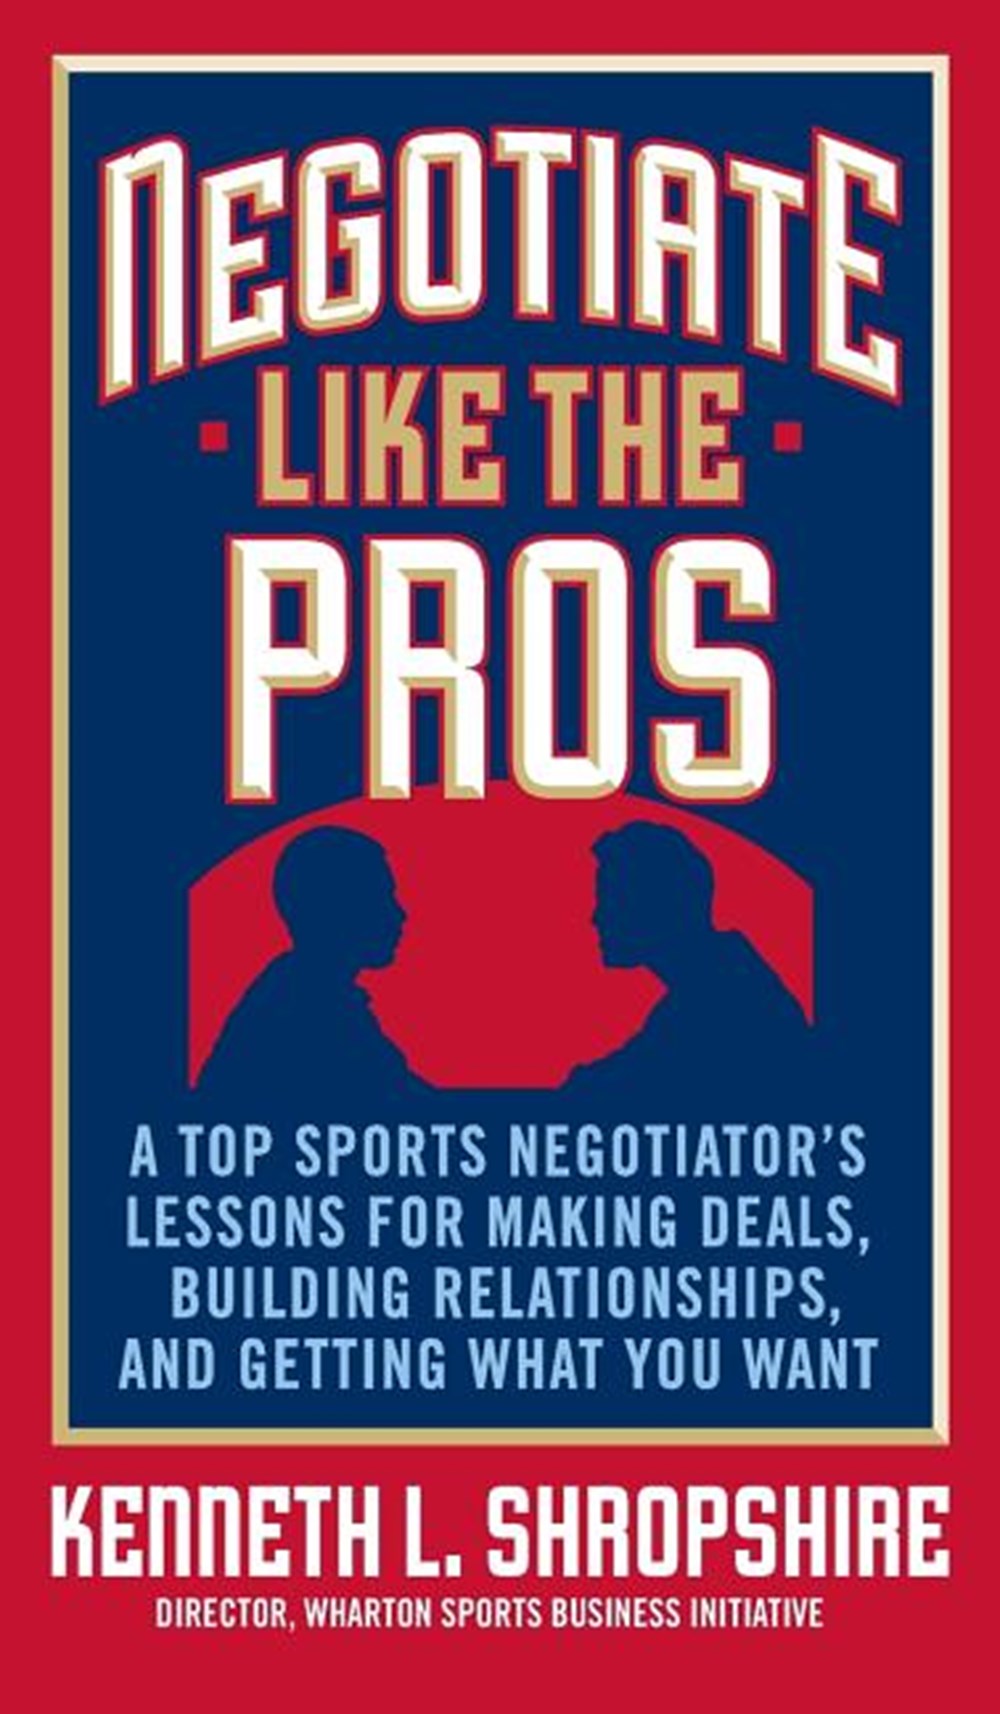 Negotiate Like the Pros: A Top Sports Negotiator's Lessons for Making Deals, Building Relationships,